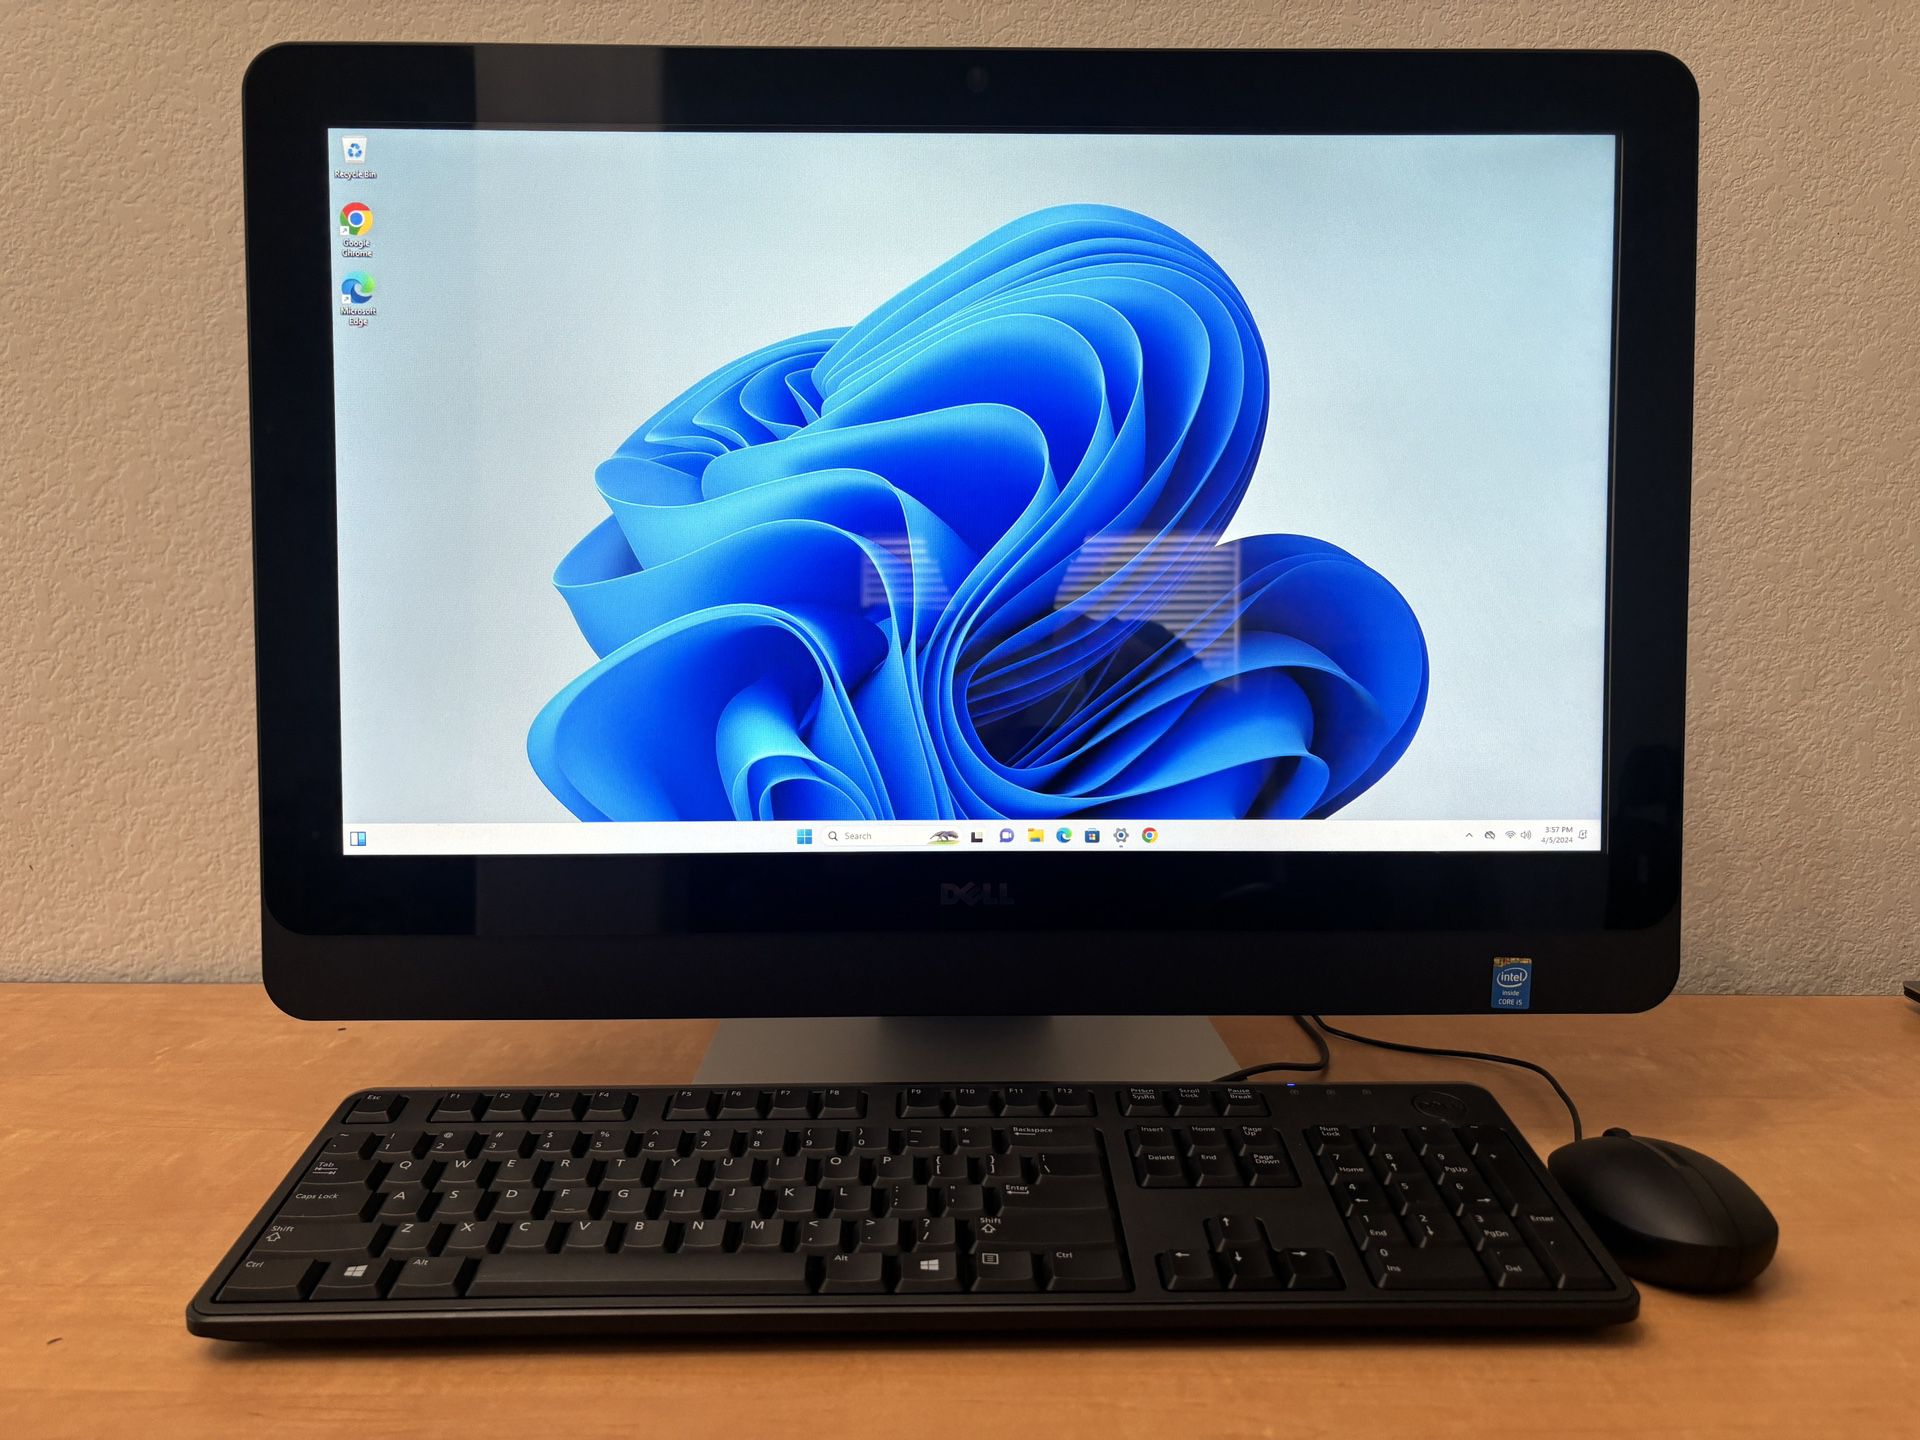 Great Fast Touchscreen Dell 23” All-in-one Desktop. $300